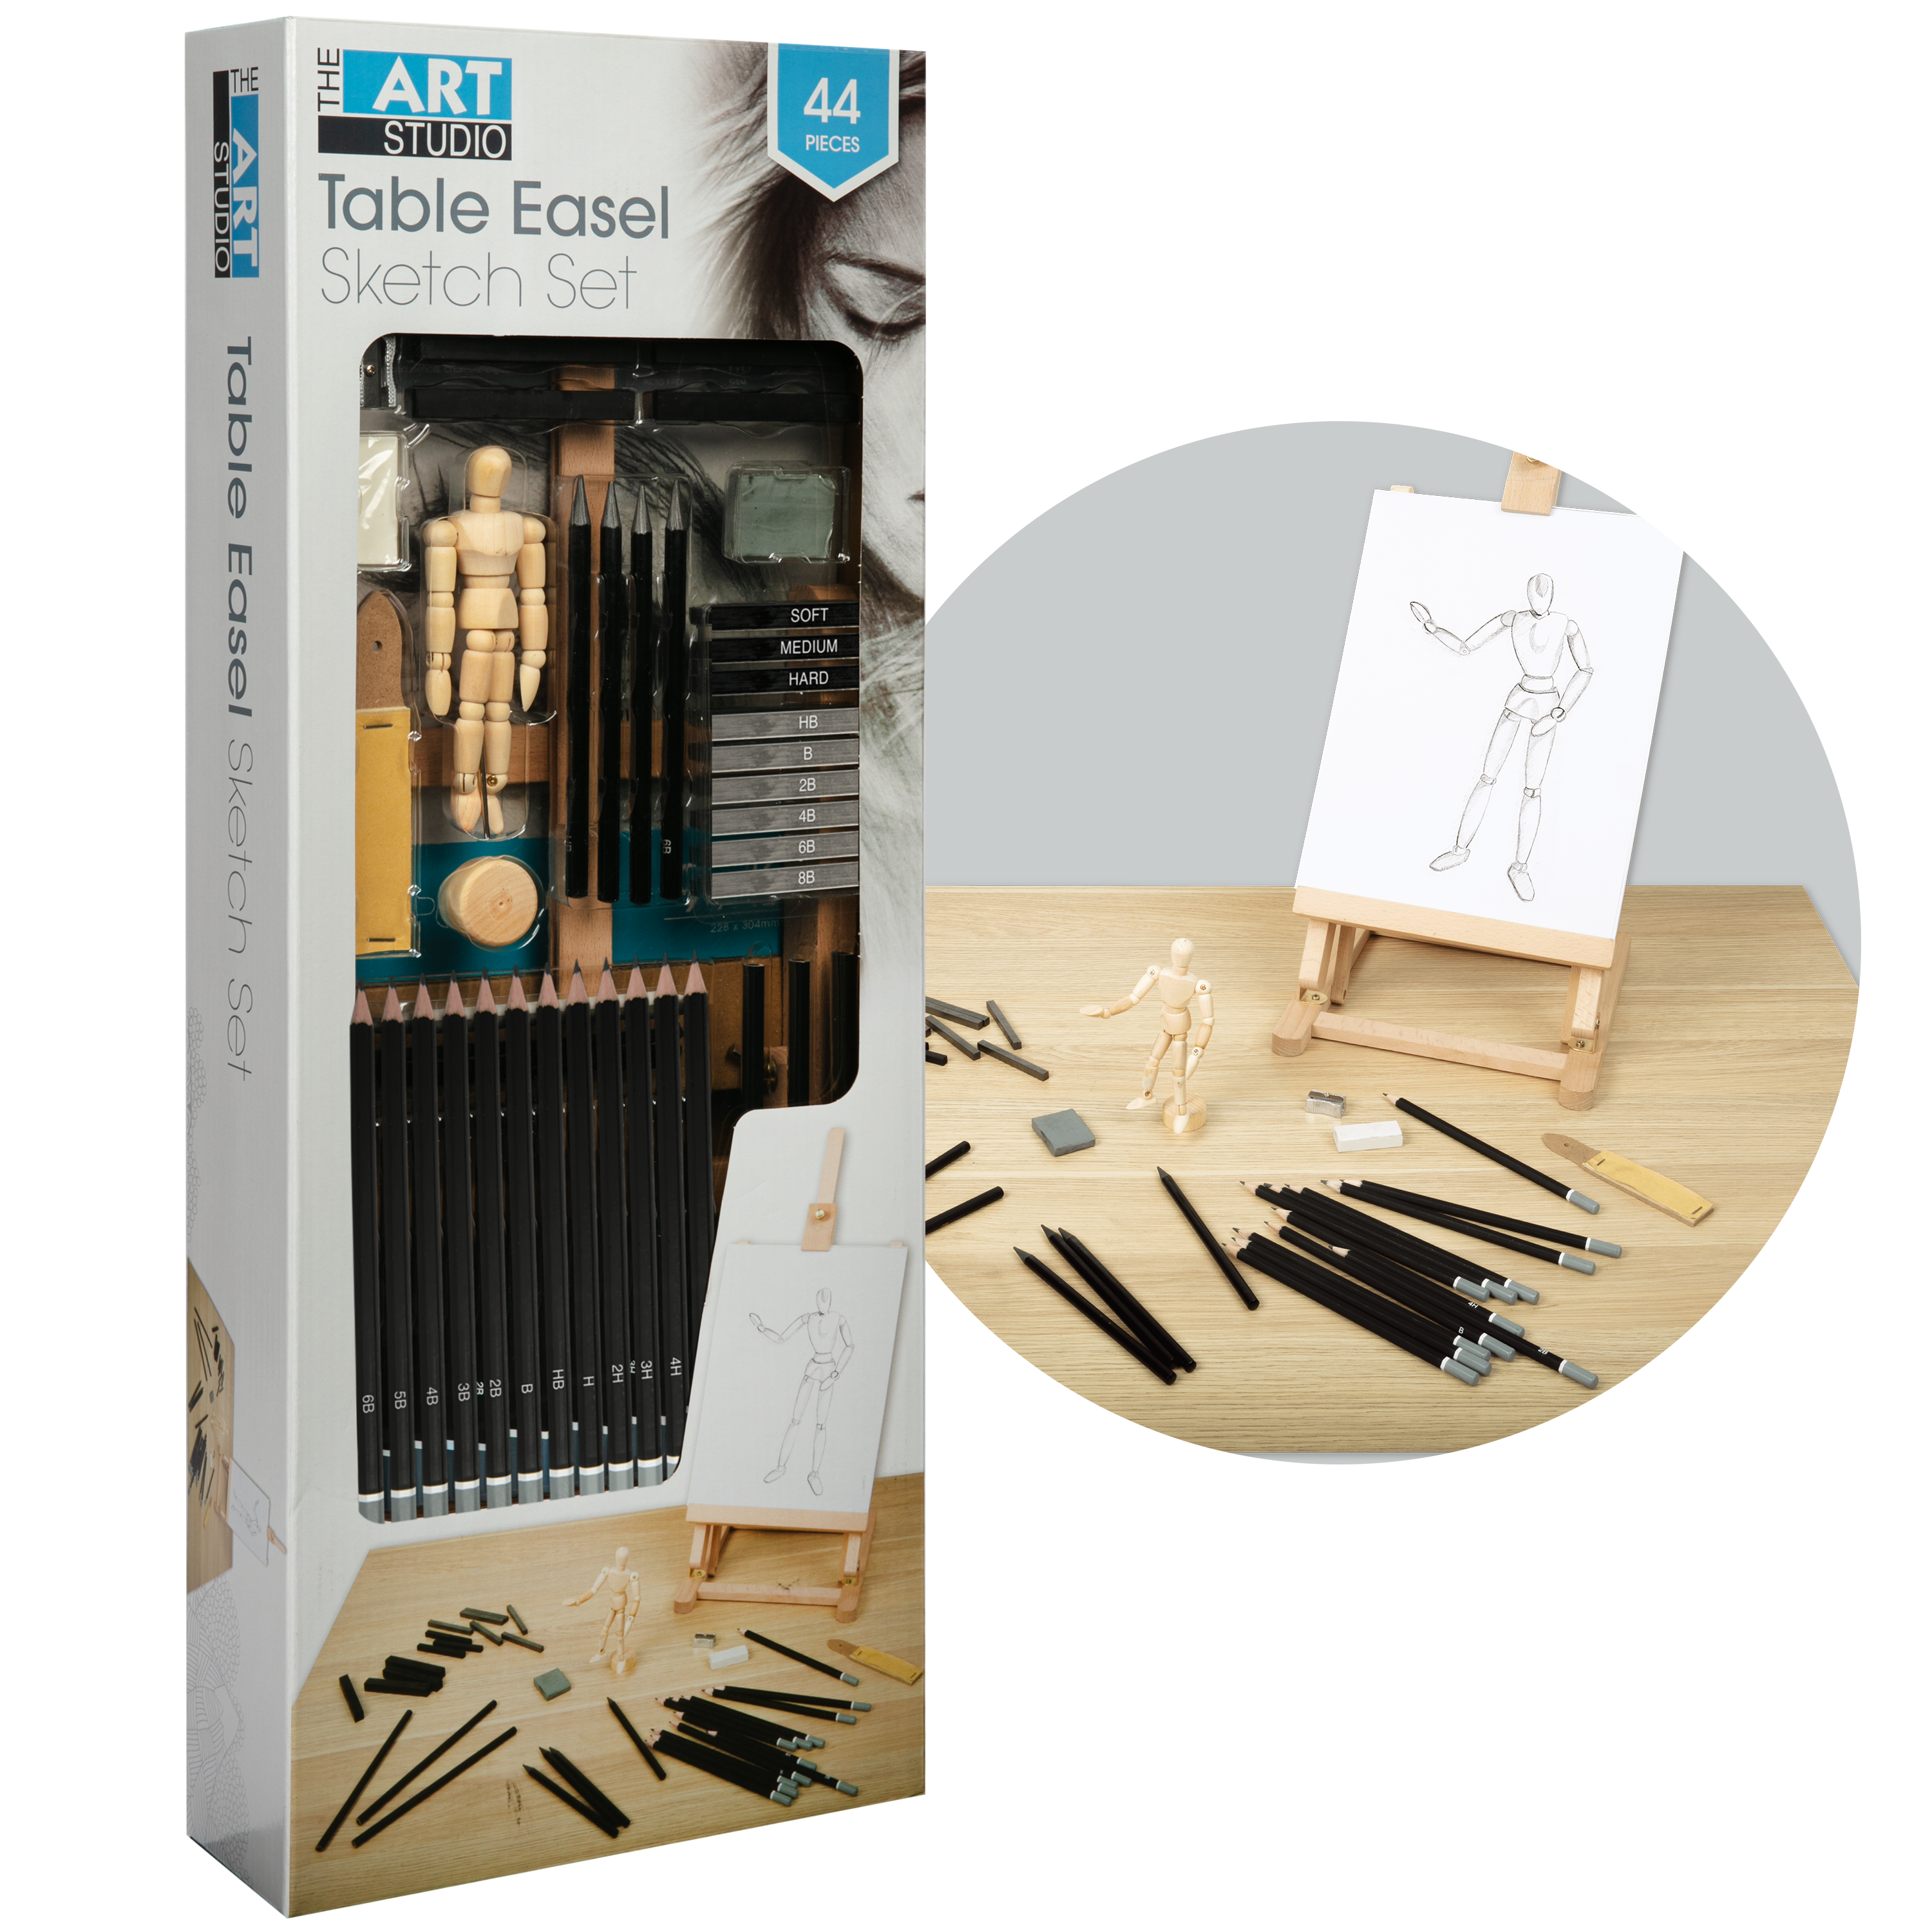 https://www.shopriot.shop/wp-content/uploads/1689/35/the-art-studio-sketching-set-with-table-easel-44-pieces-943-shop-smarter-live-better_0.png